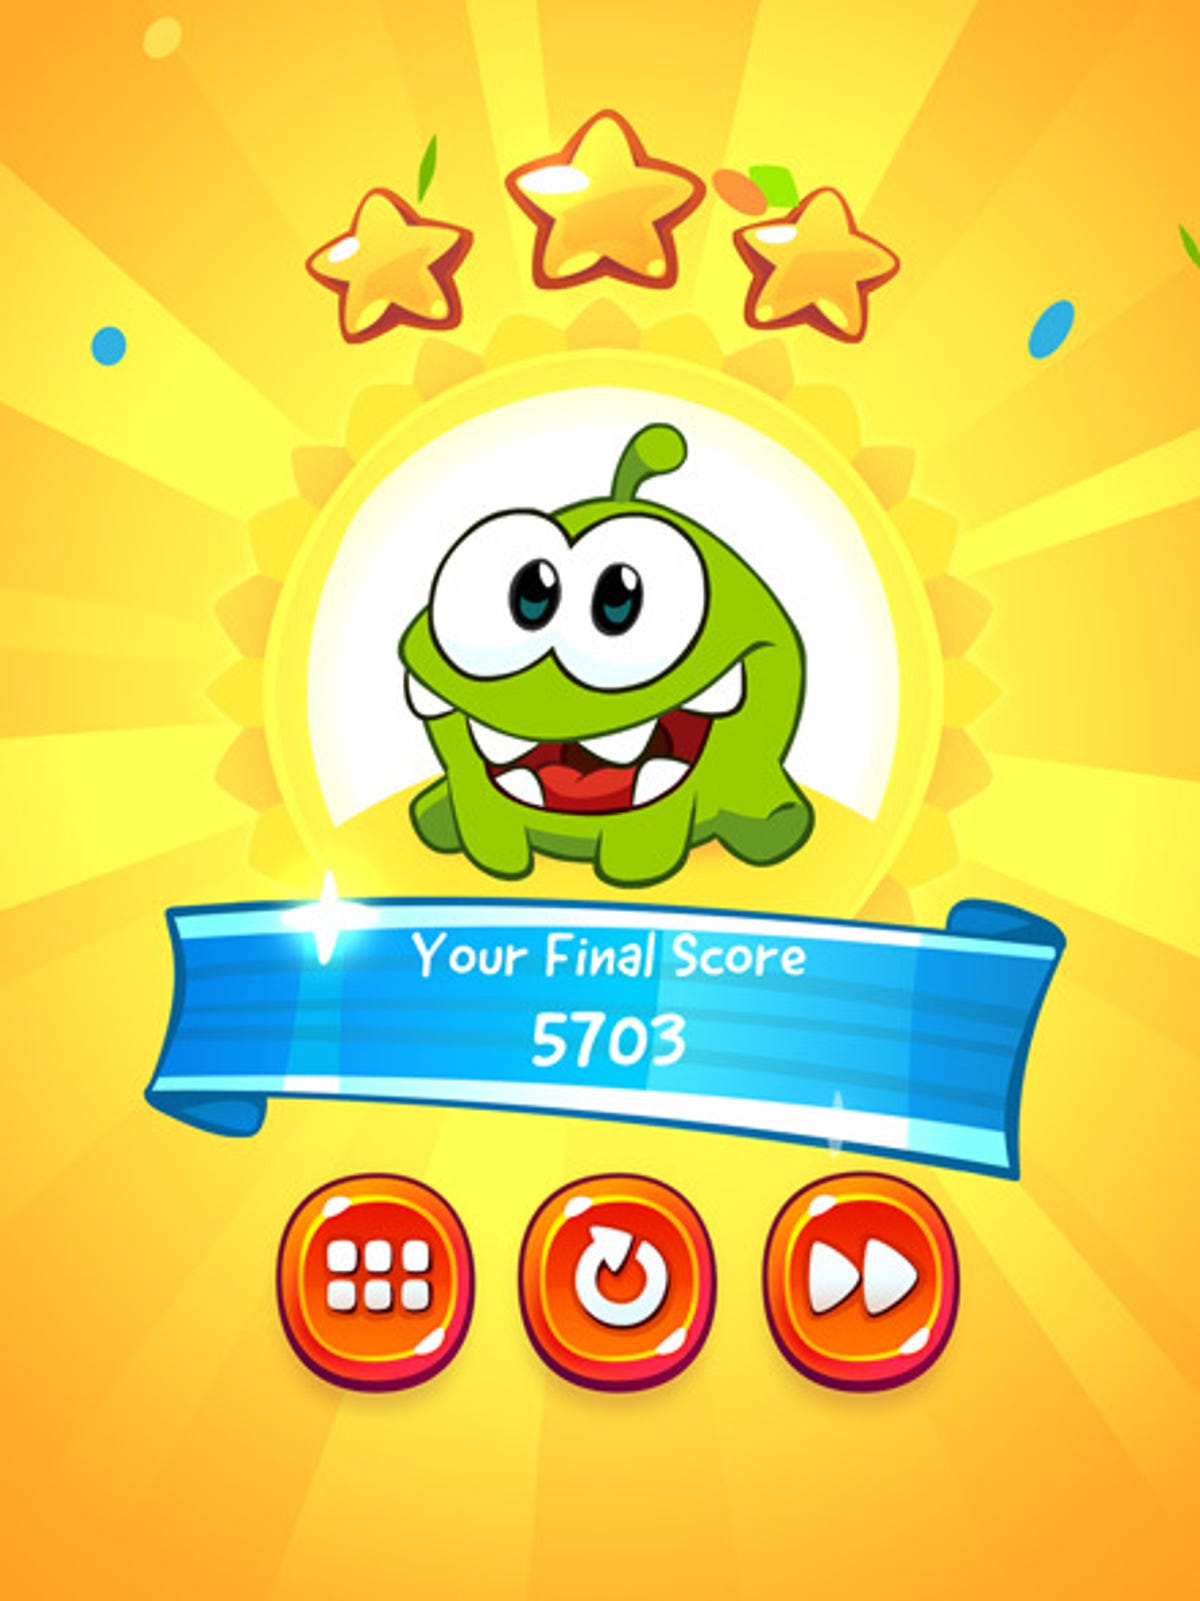 Cut the Rope 2 has the same familiar gameplay with new game